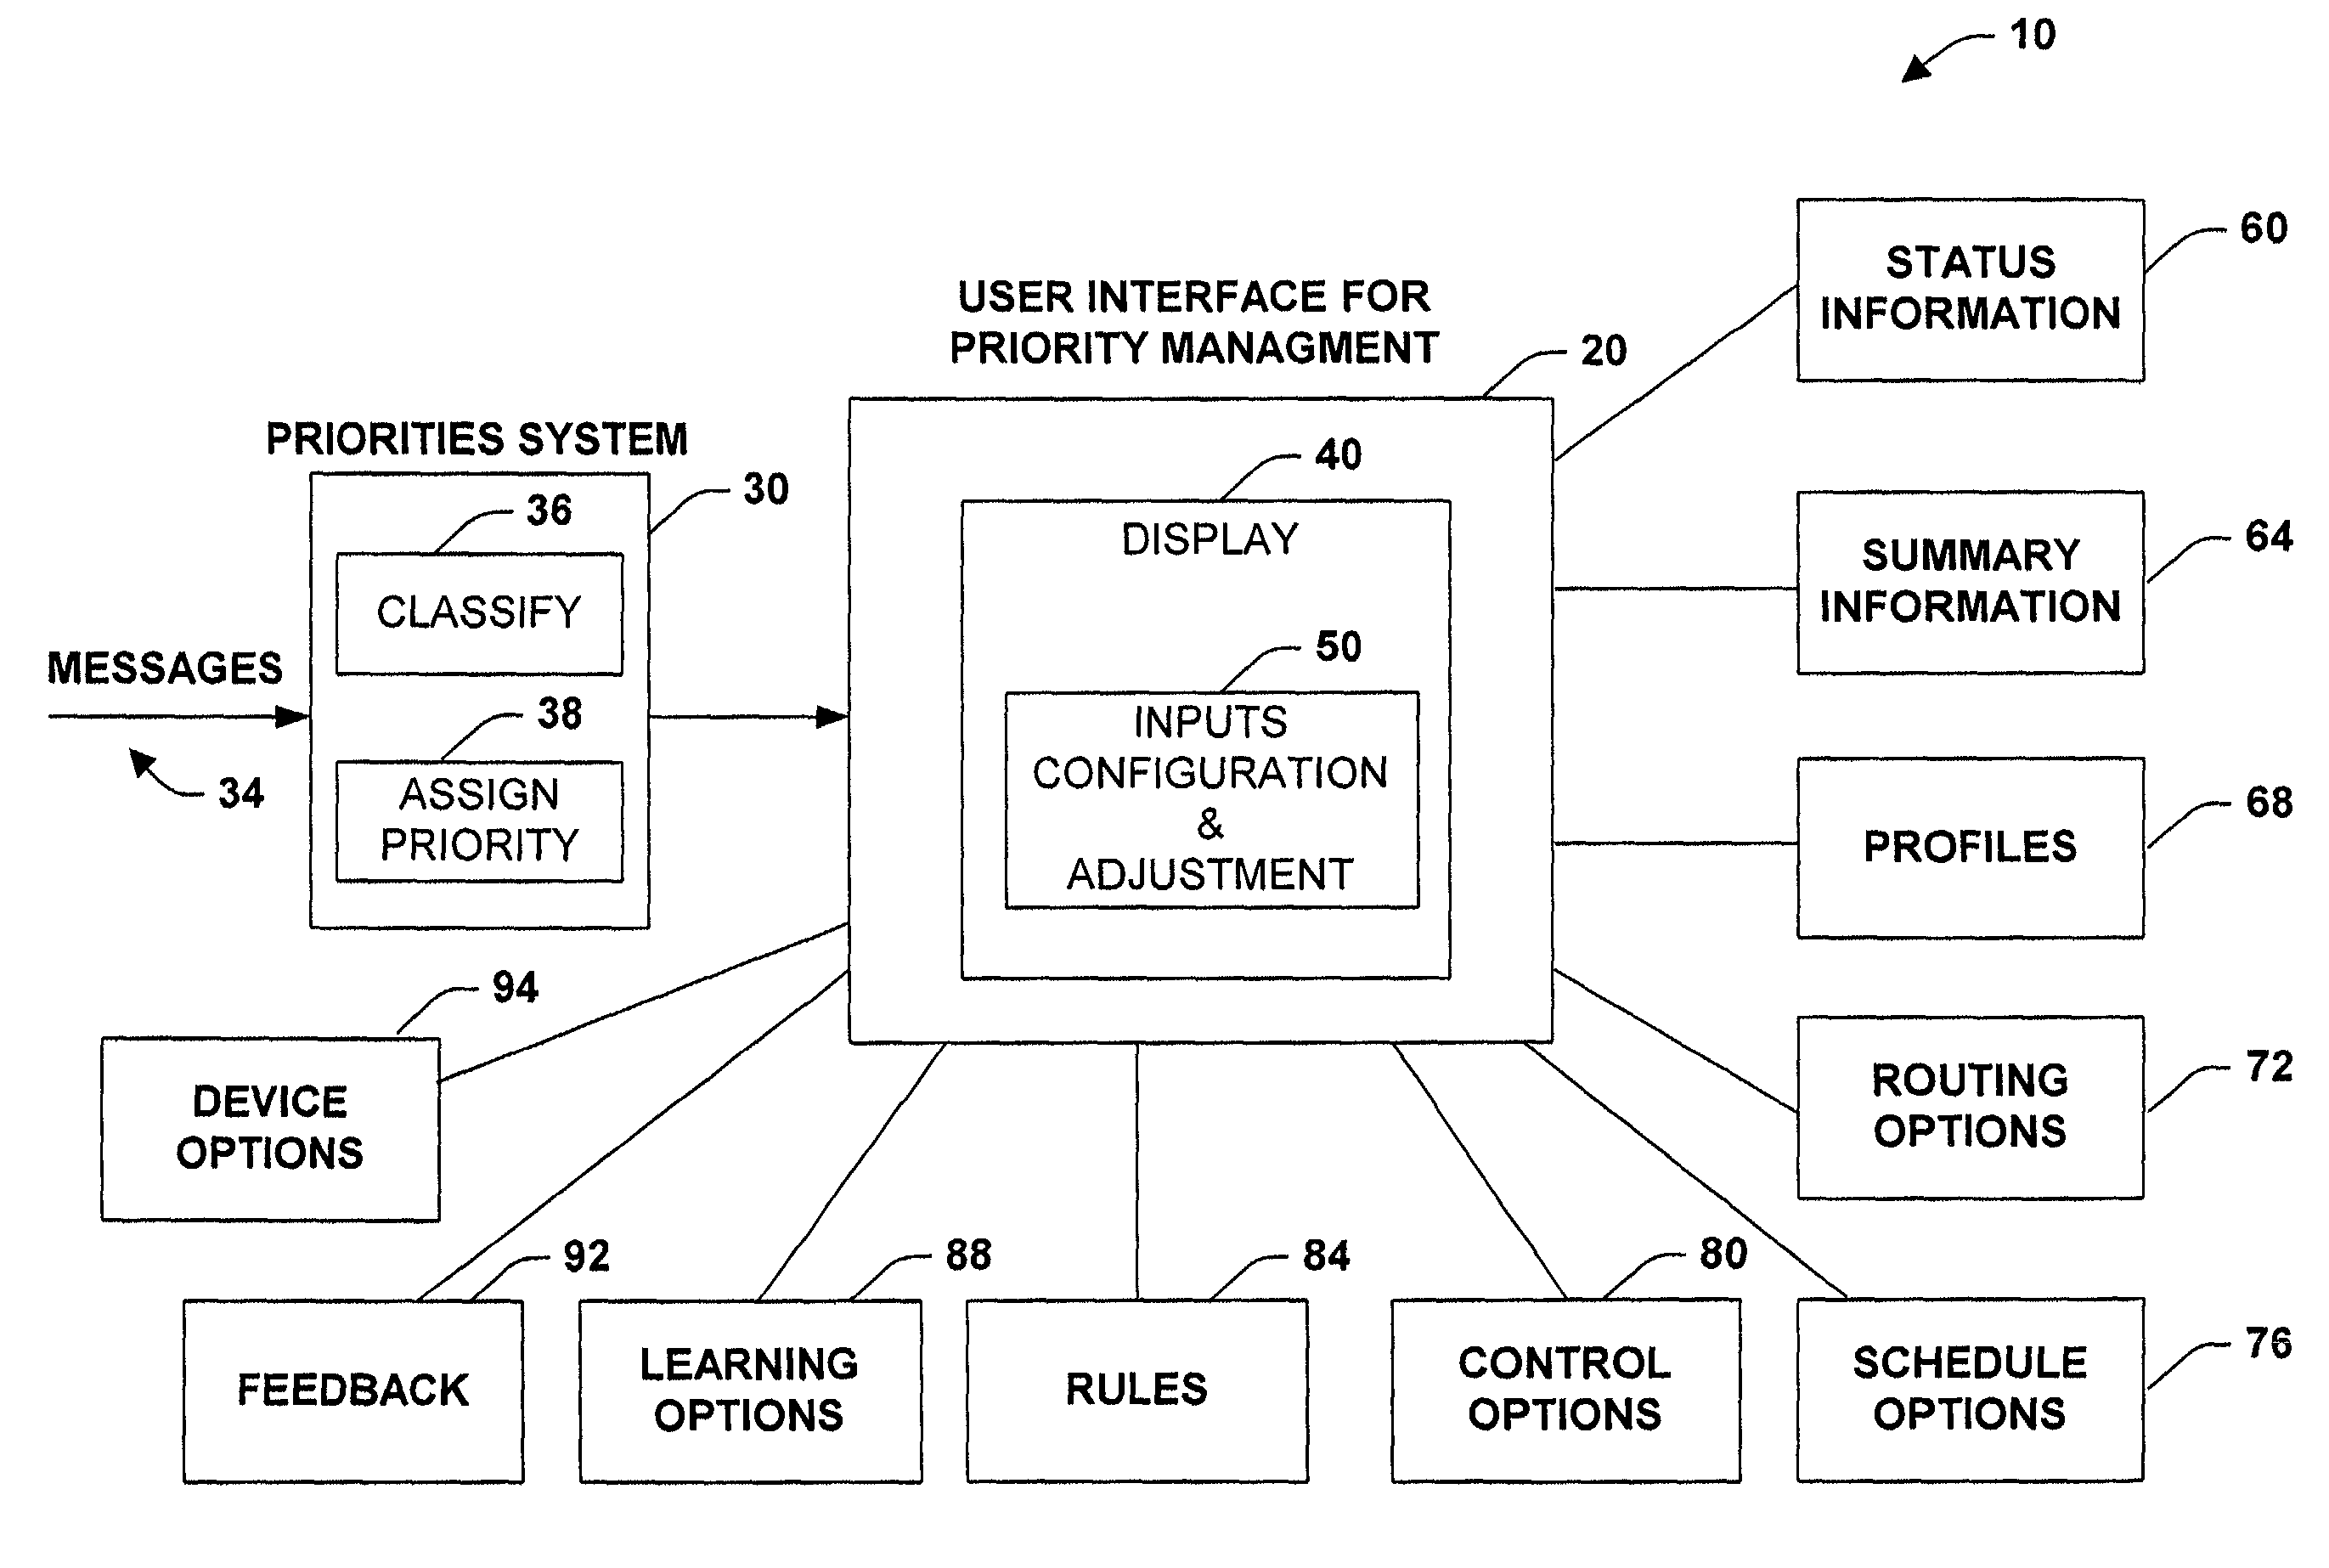 Controls and displays for acquiring preferences, inspecting behavior, and guiding the learning and decision policies of an adaptive communications prioritization and routing system